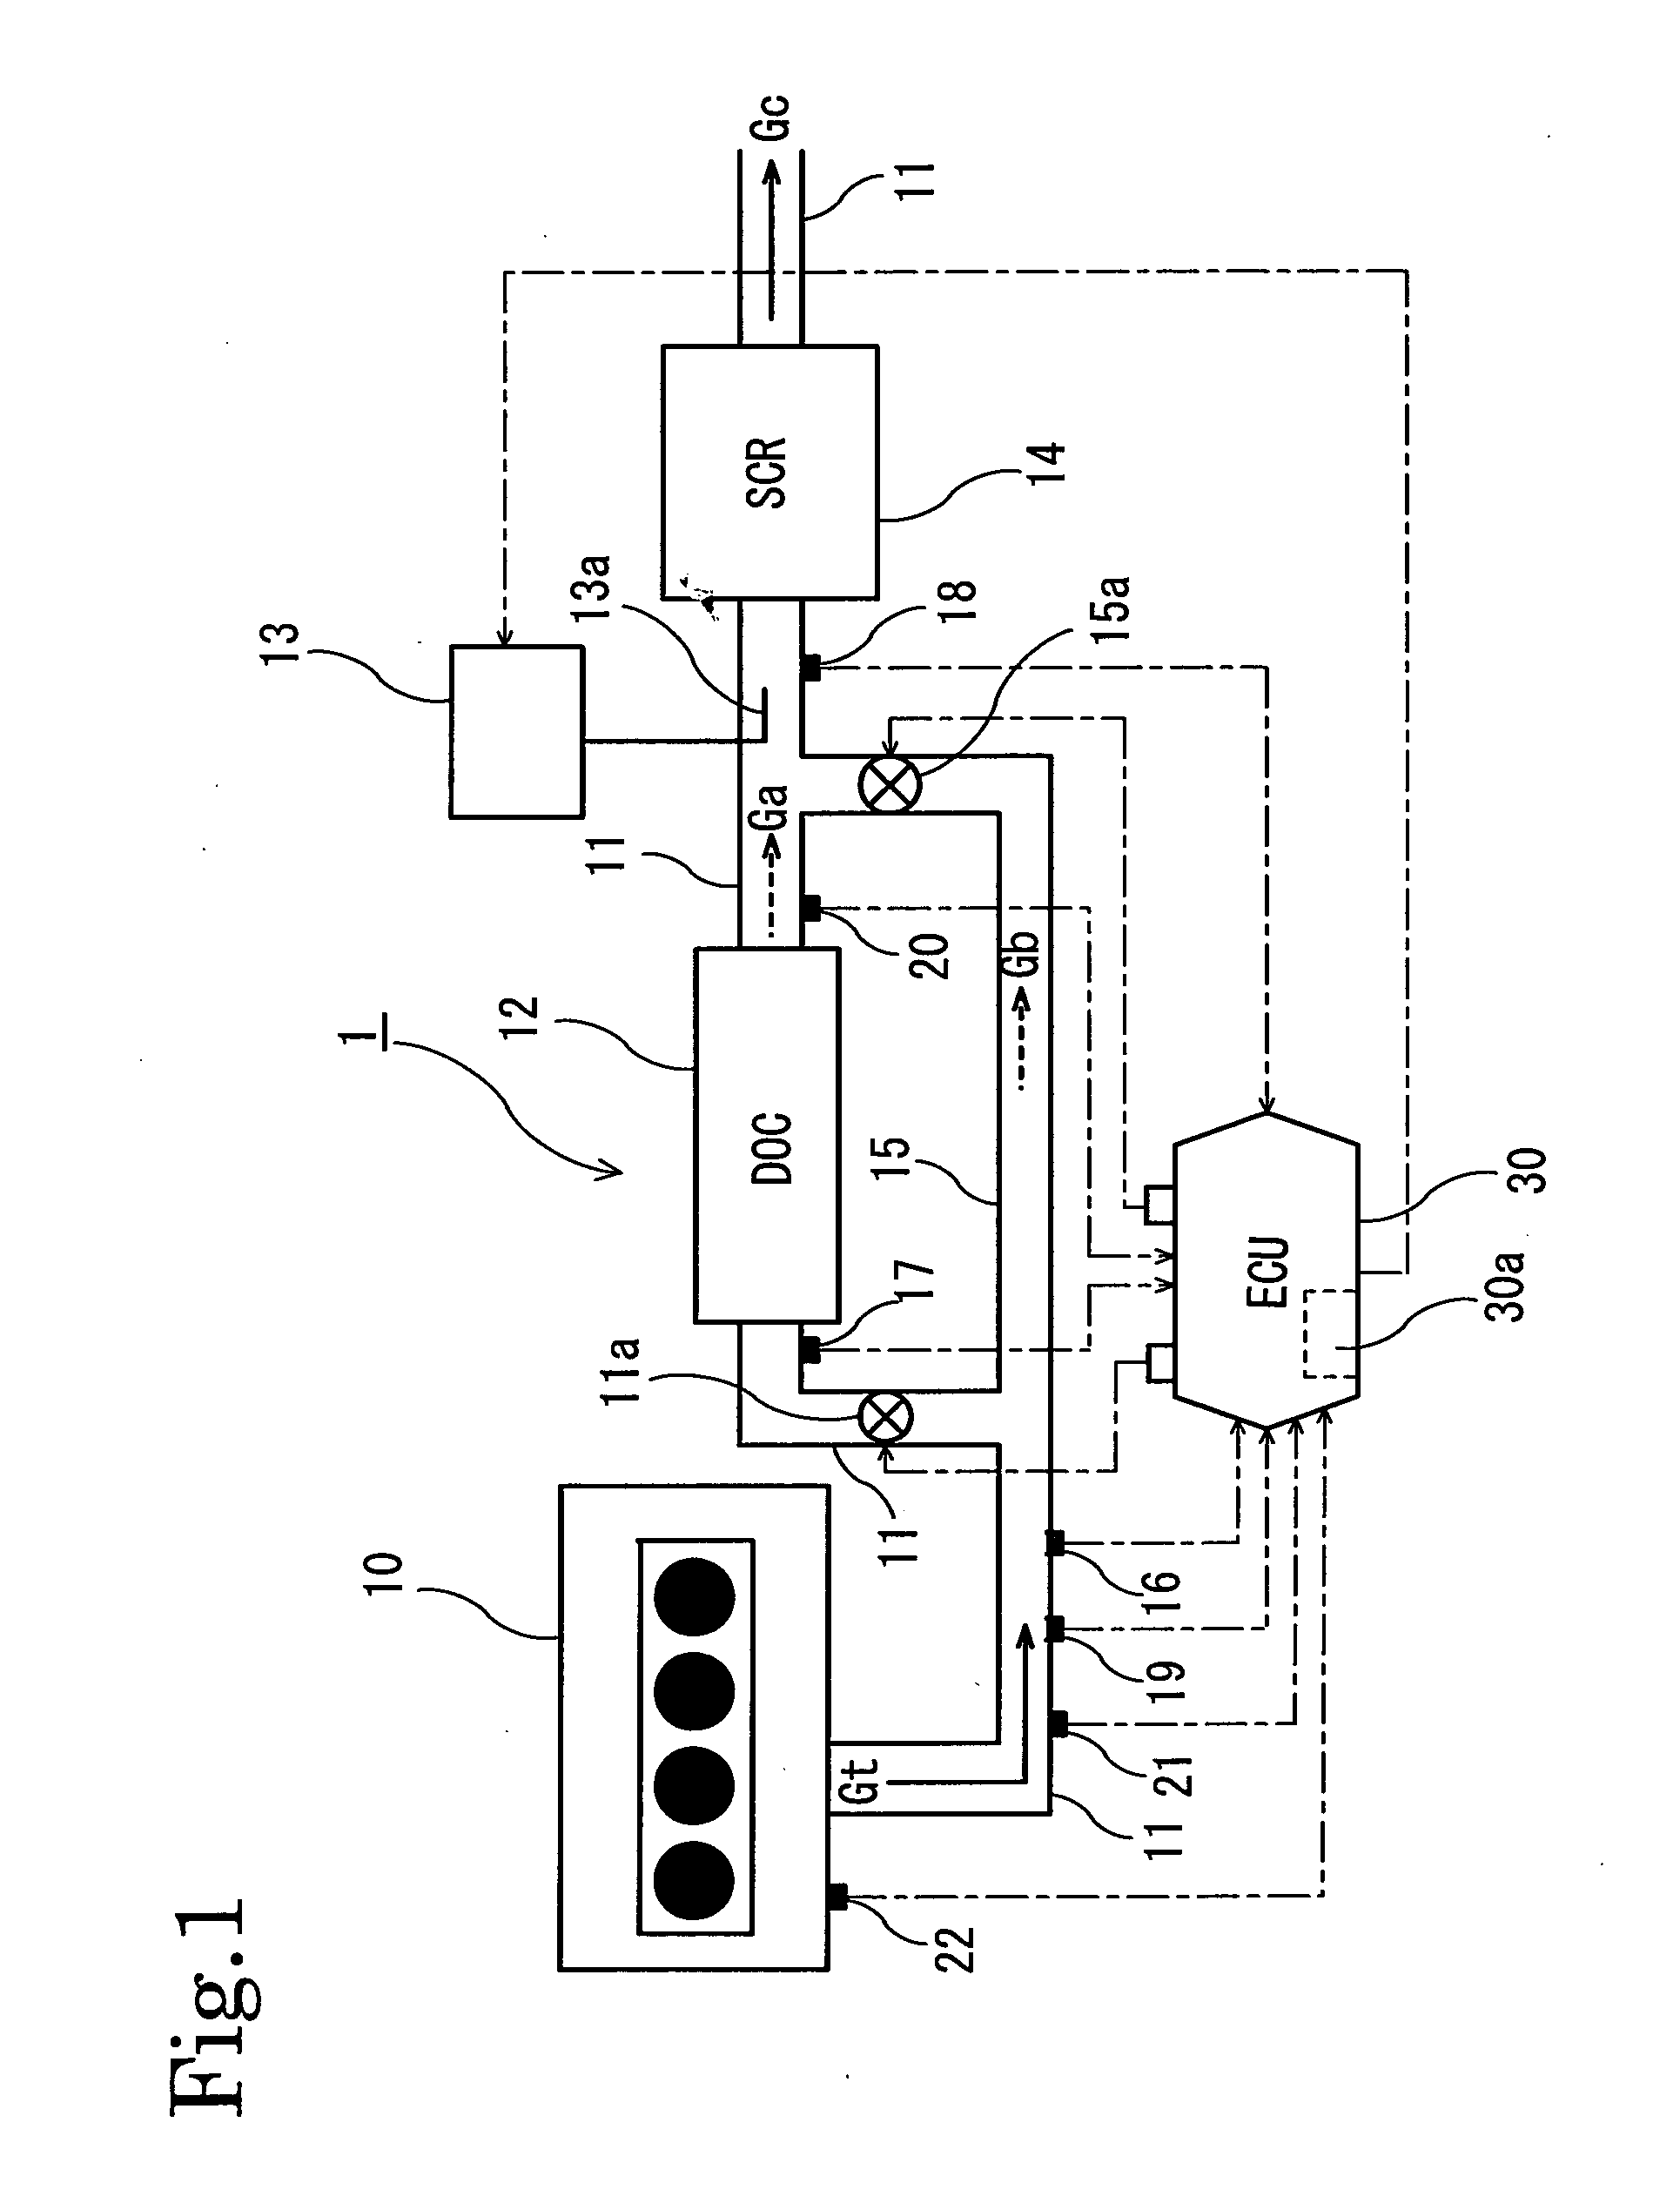 Method of controlling nox purification system, and nox purification system